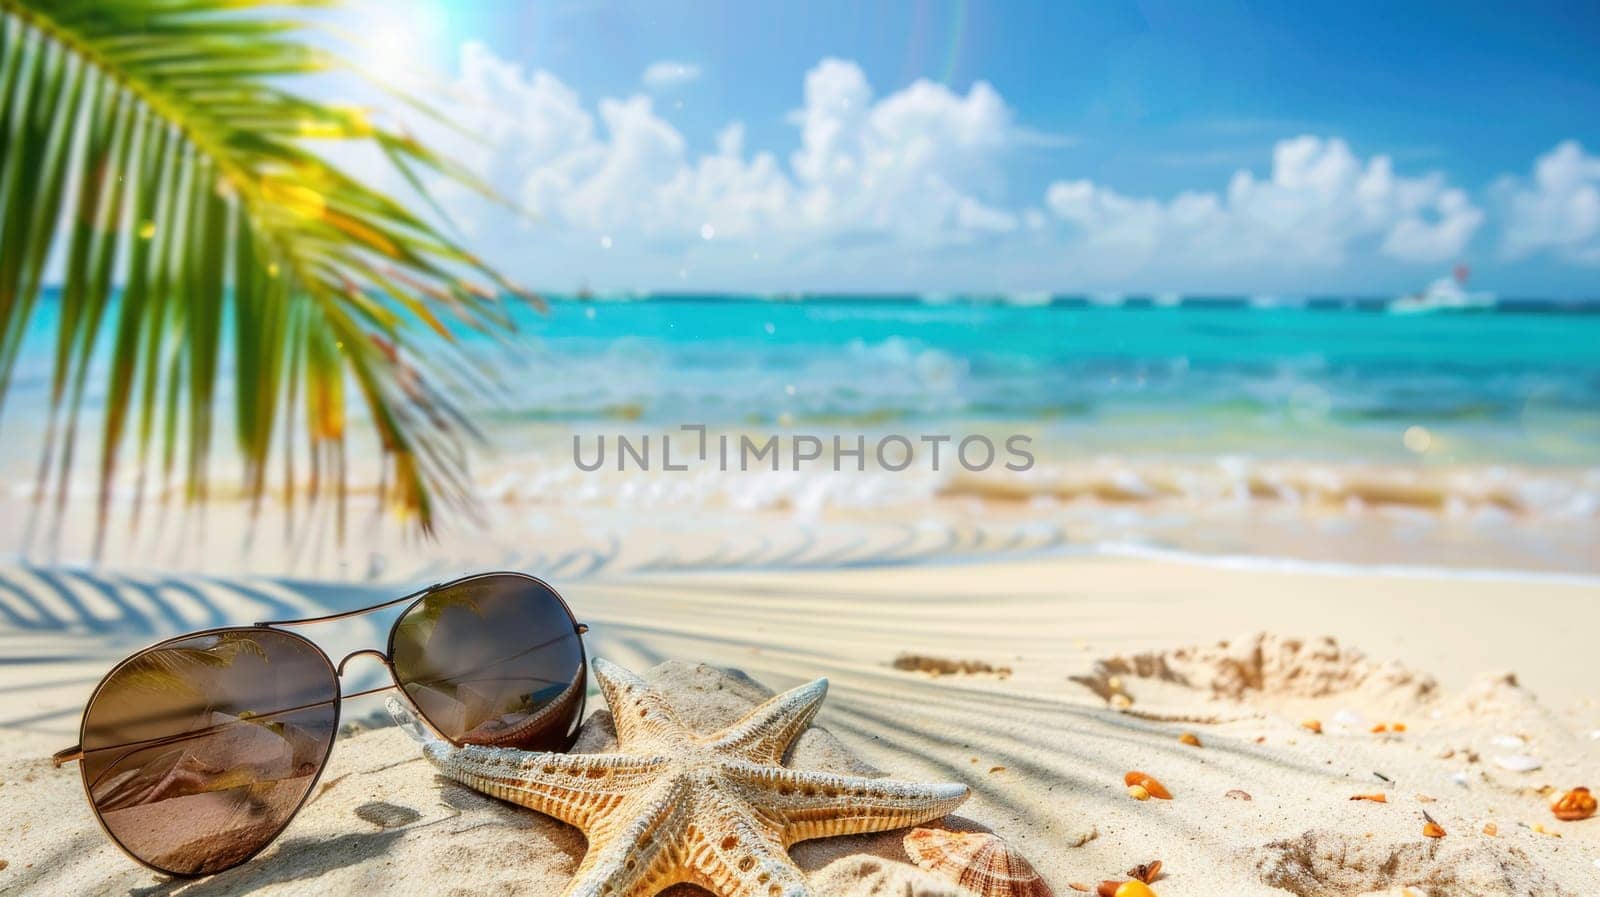 A pair of sunglasses and a starfish are on a beach. The beach is sunny and the water is blue